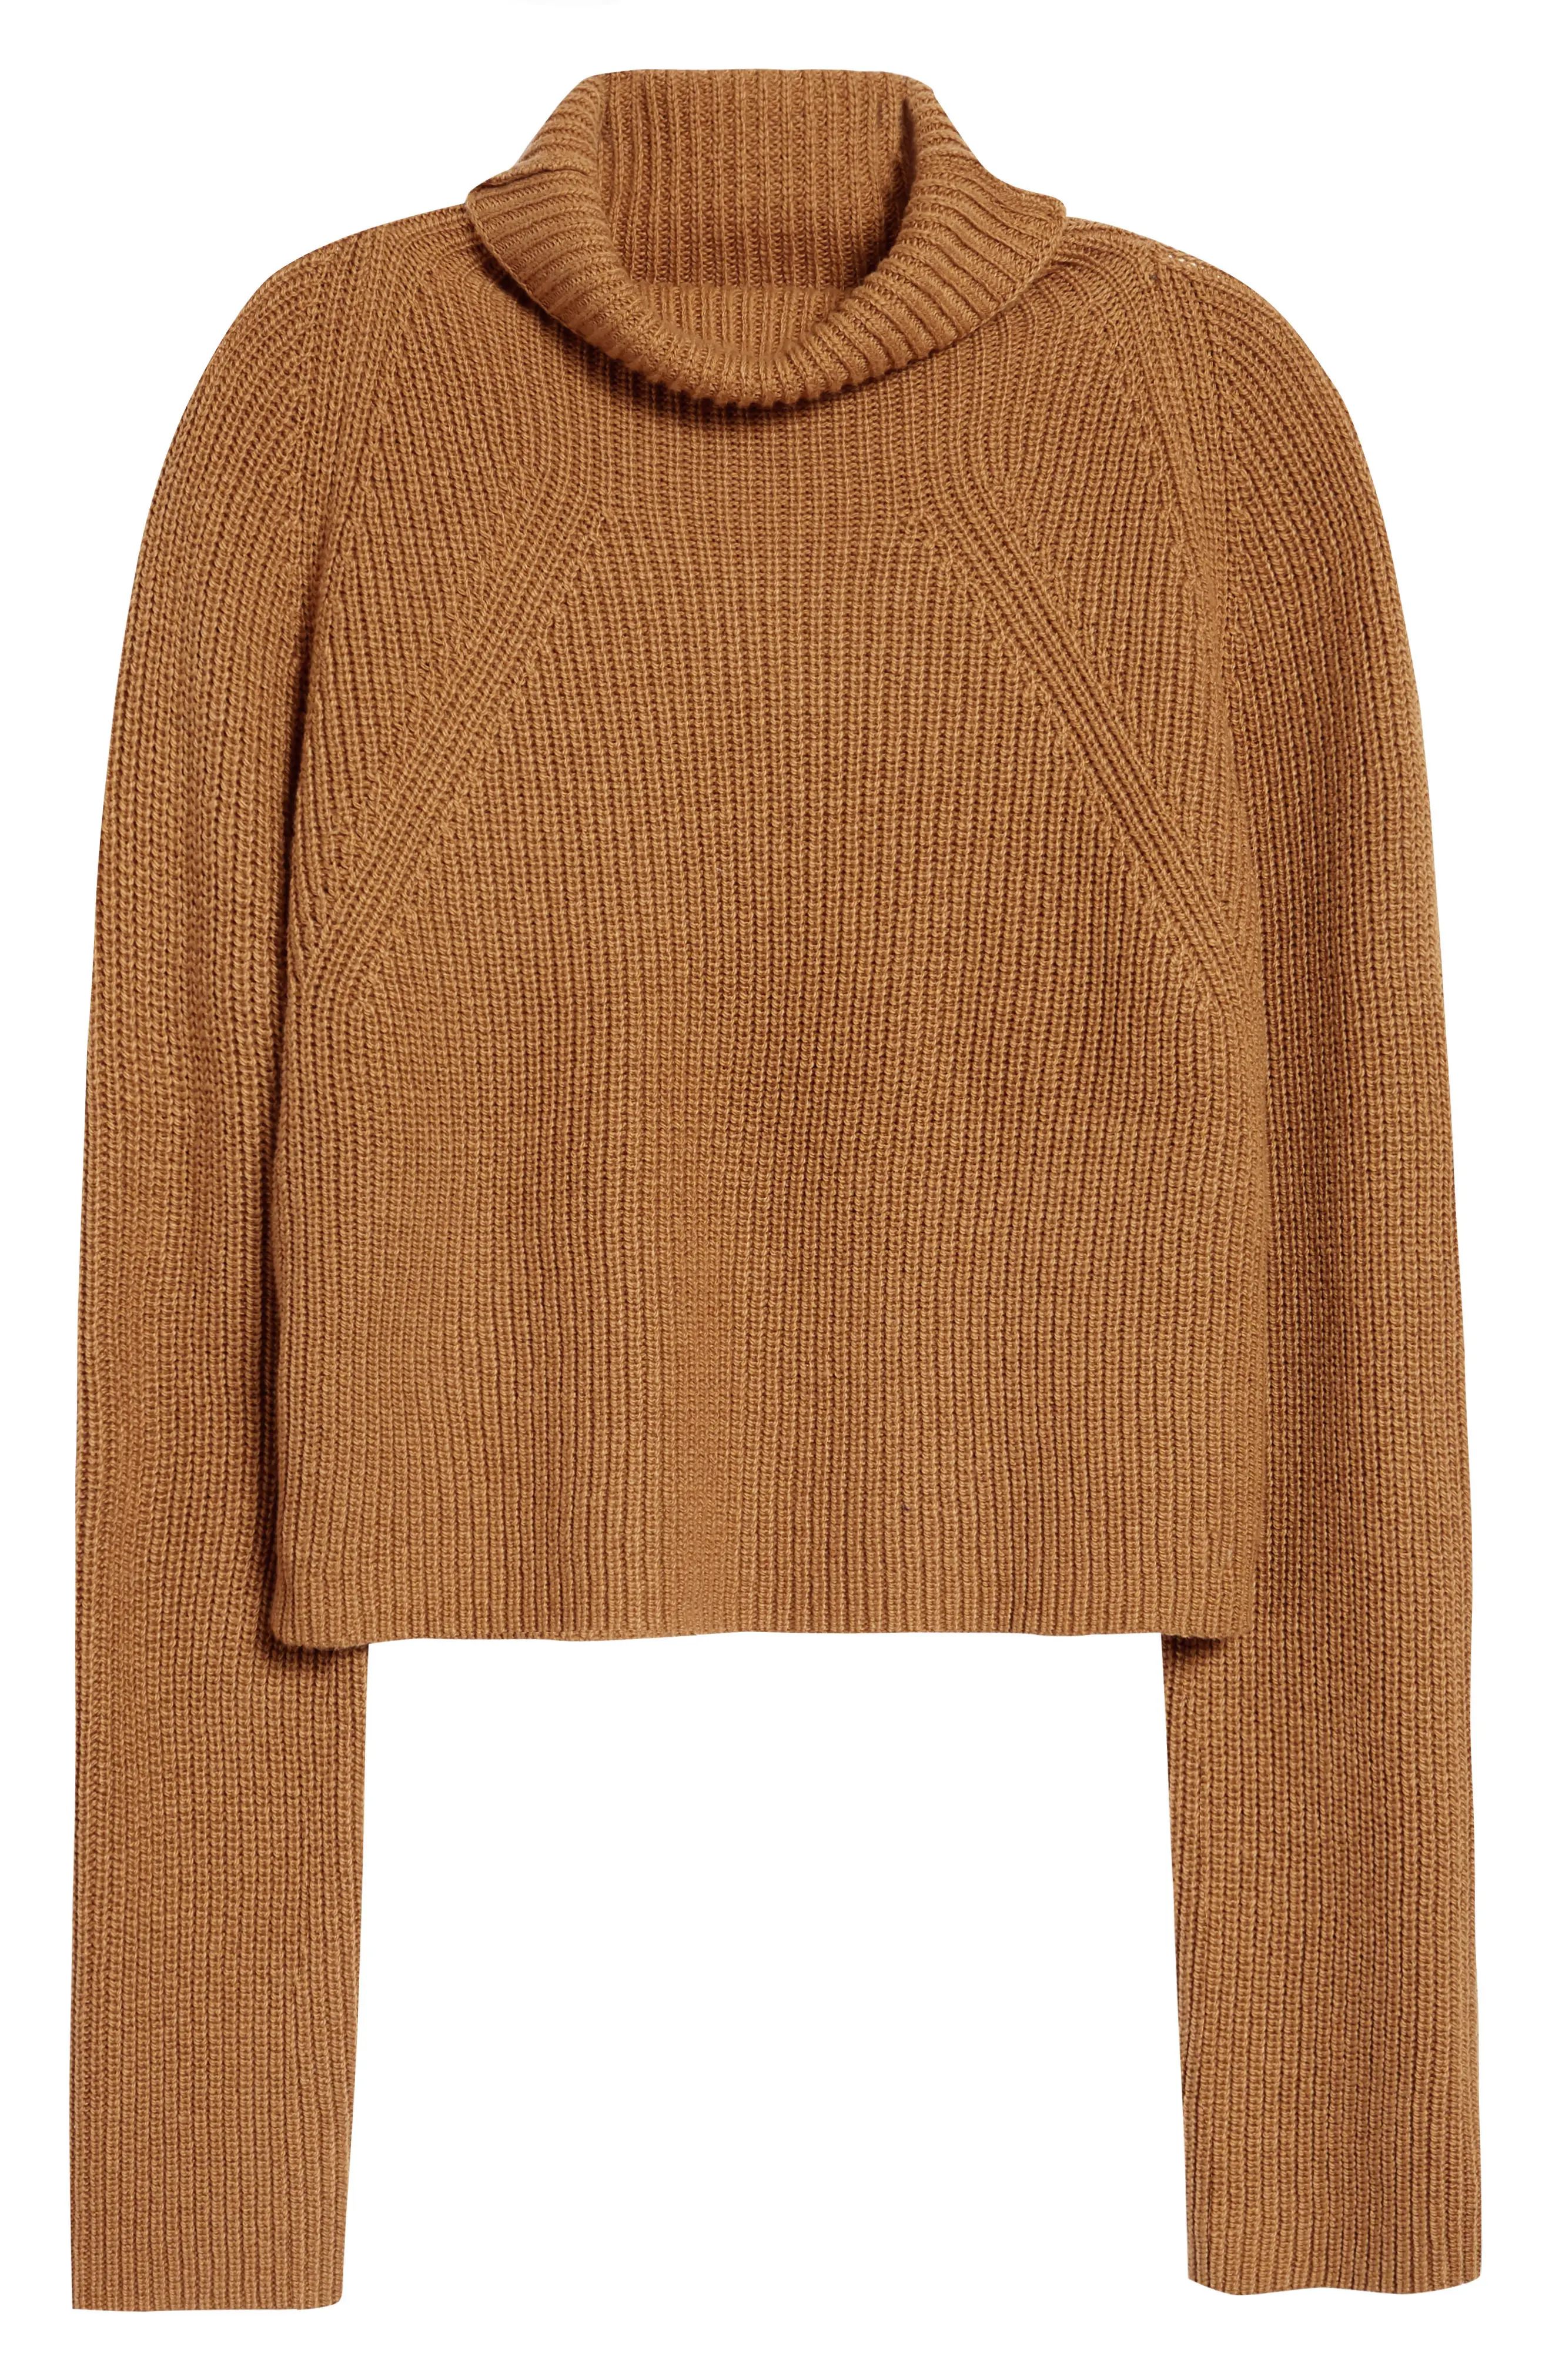 Women's Leith Transfer Stitch Turtleneck Sweater, Size Large - Brown | Nordstrom